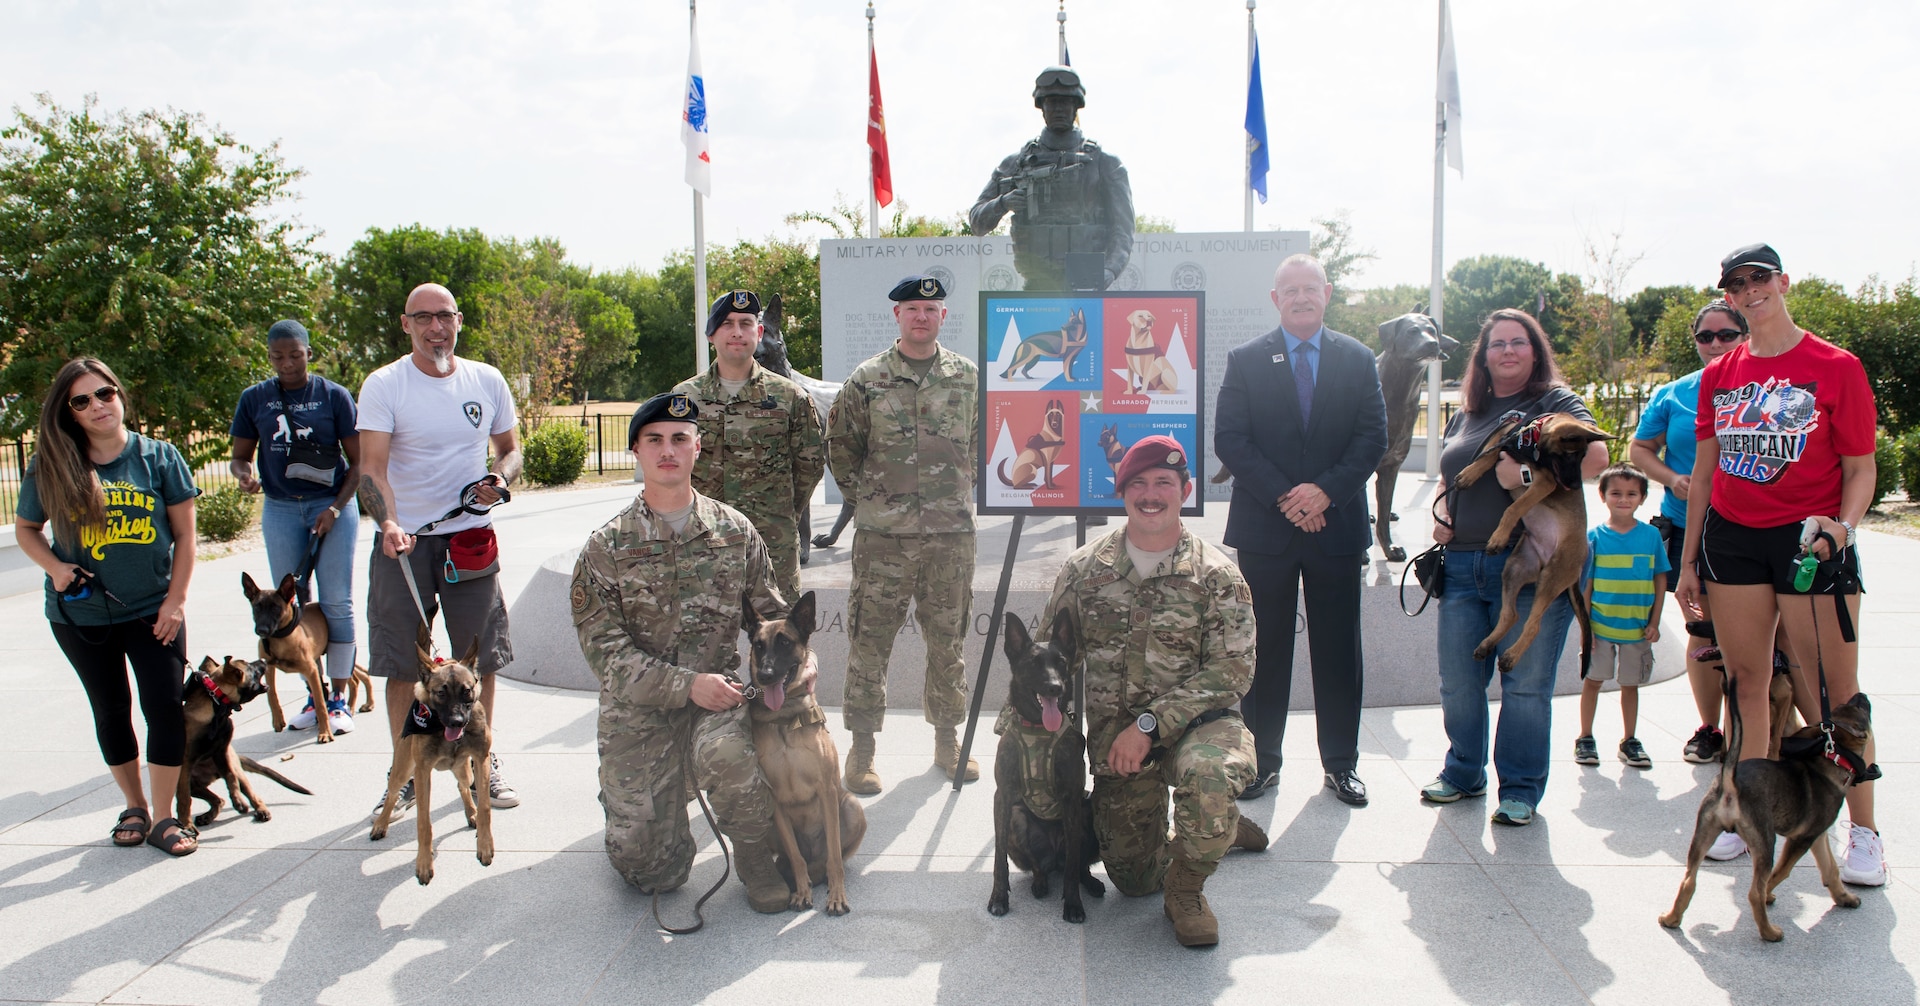 U.S. Air Force members, Robert Carr (center), Post Master of San Antonio, and local volunteers of the K-9 program pose for a photo during the Military Working Dog Stamp ceremony Aug. 15, 2019, at Joint Base San Antonio-Medina Annex. The stamp honors dogs who have served in the U.S. armed forces since the U.S. Army created the War Dog Program K-9 Corps and began training man’s best friend in March 1942.